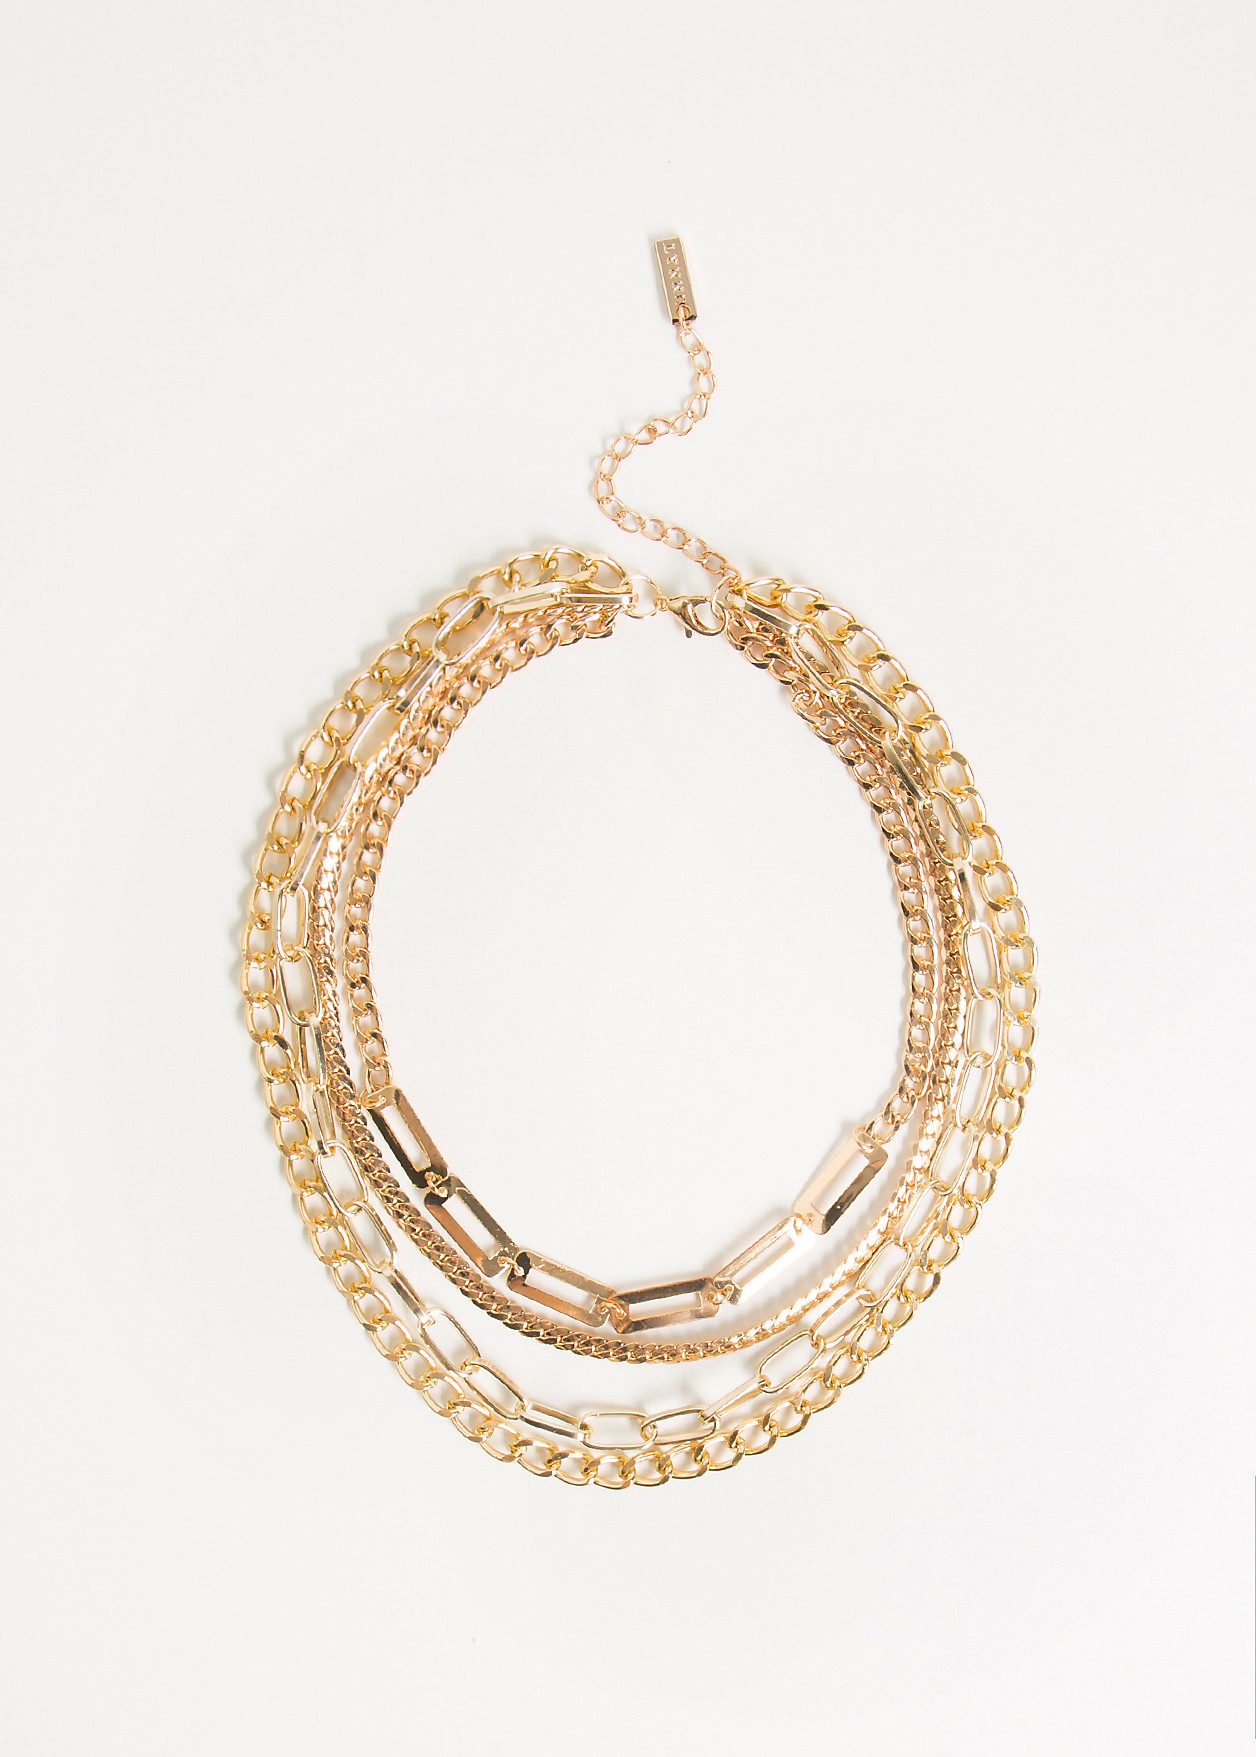 Necklace with multiple layers